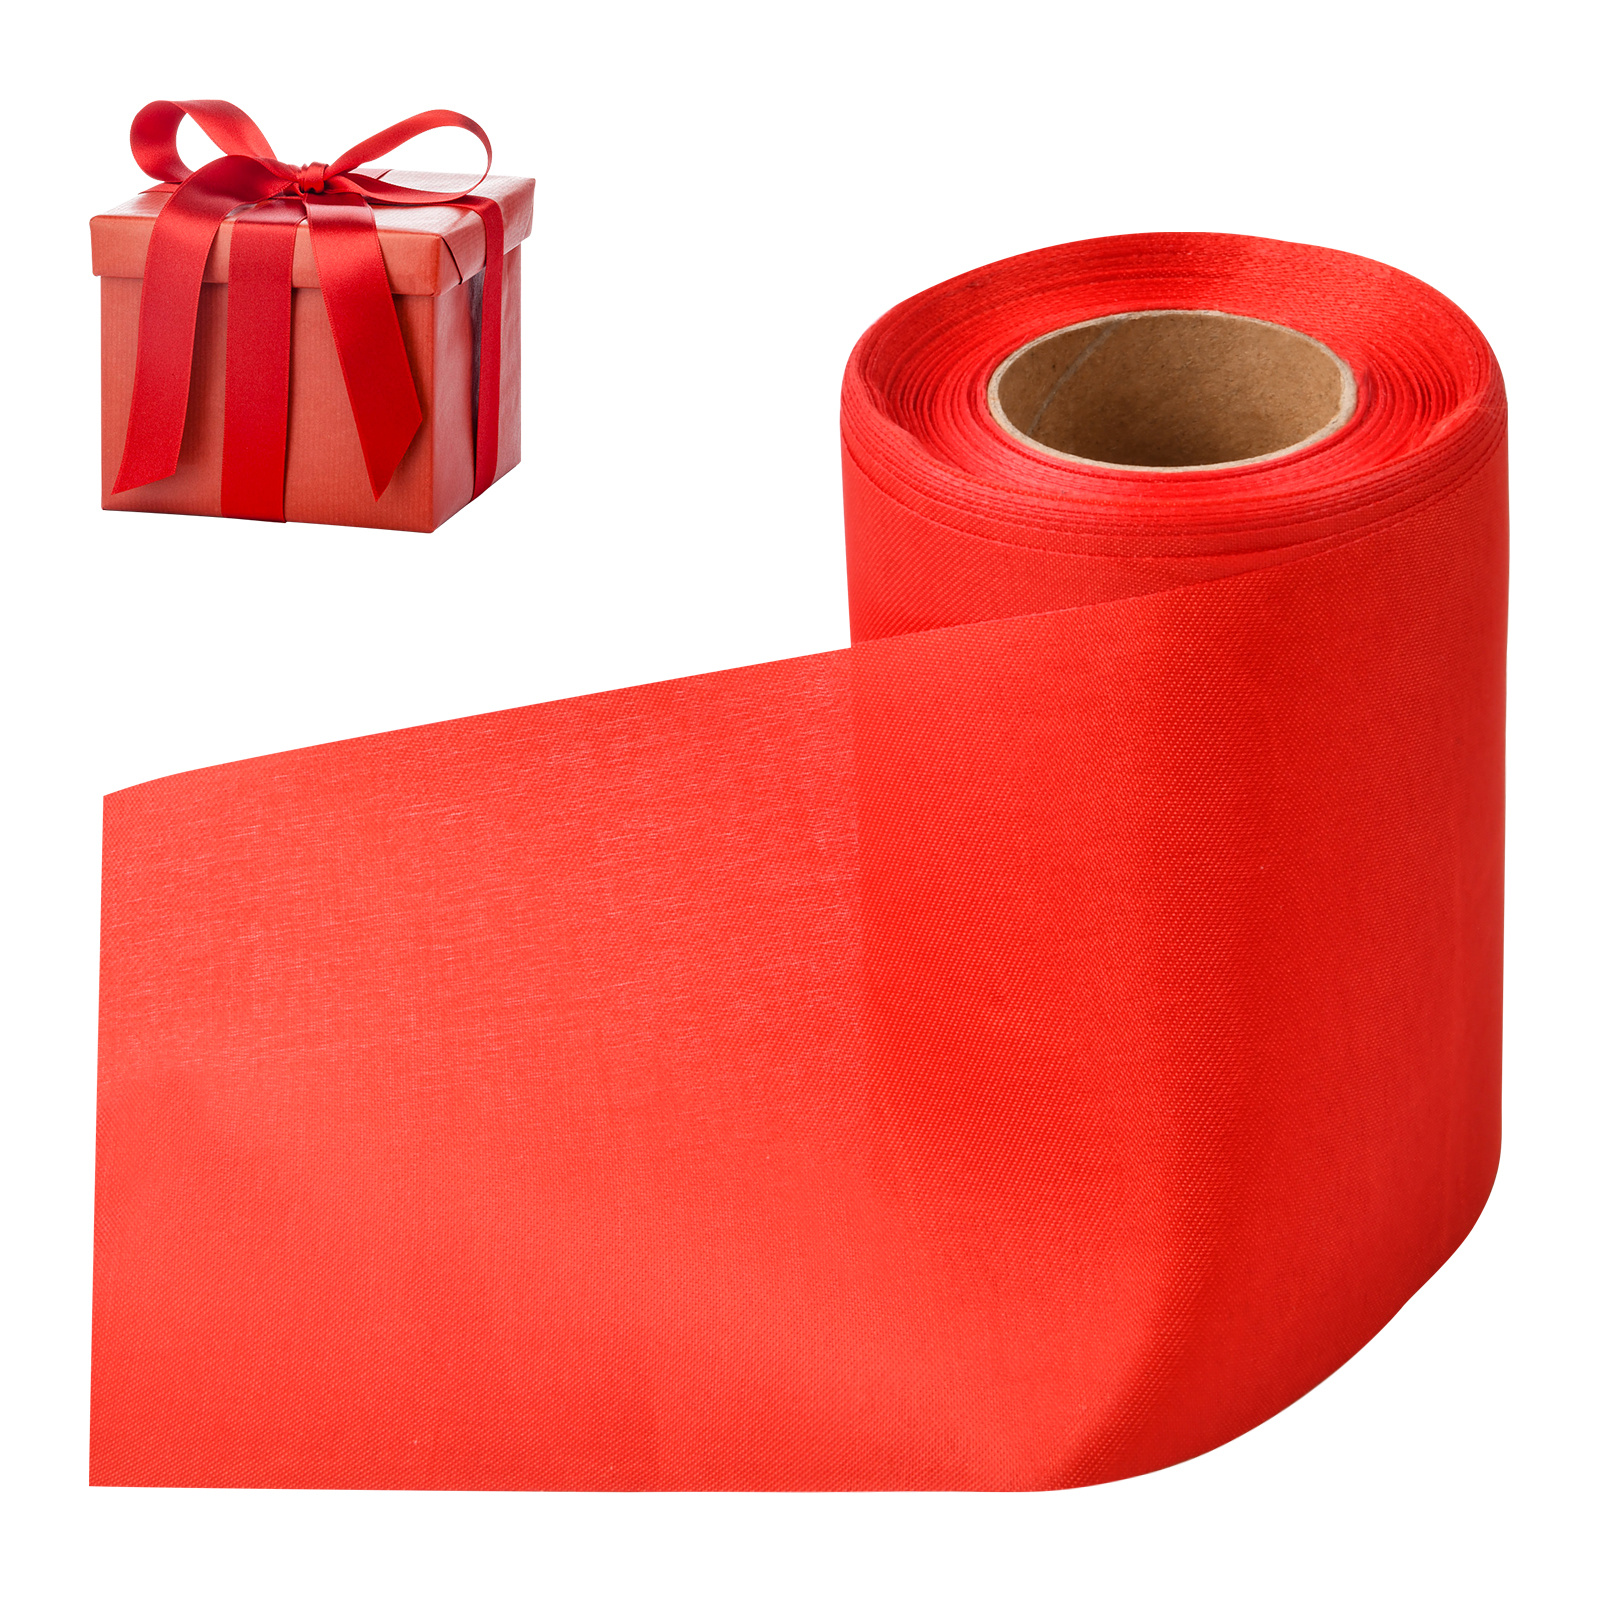  Wide Red Ribbon for Gift Wrapping - 1 inch x 100 Yards, Solid  Color Fabric Large Ribbon Roll, Soft Smooth Polyester Ribbon Ideal for Gift,  Crafts, Apparel, Wedding Decor, DIY Bow